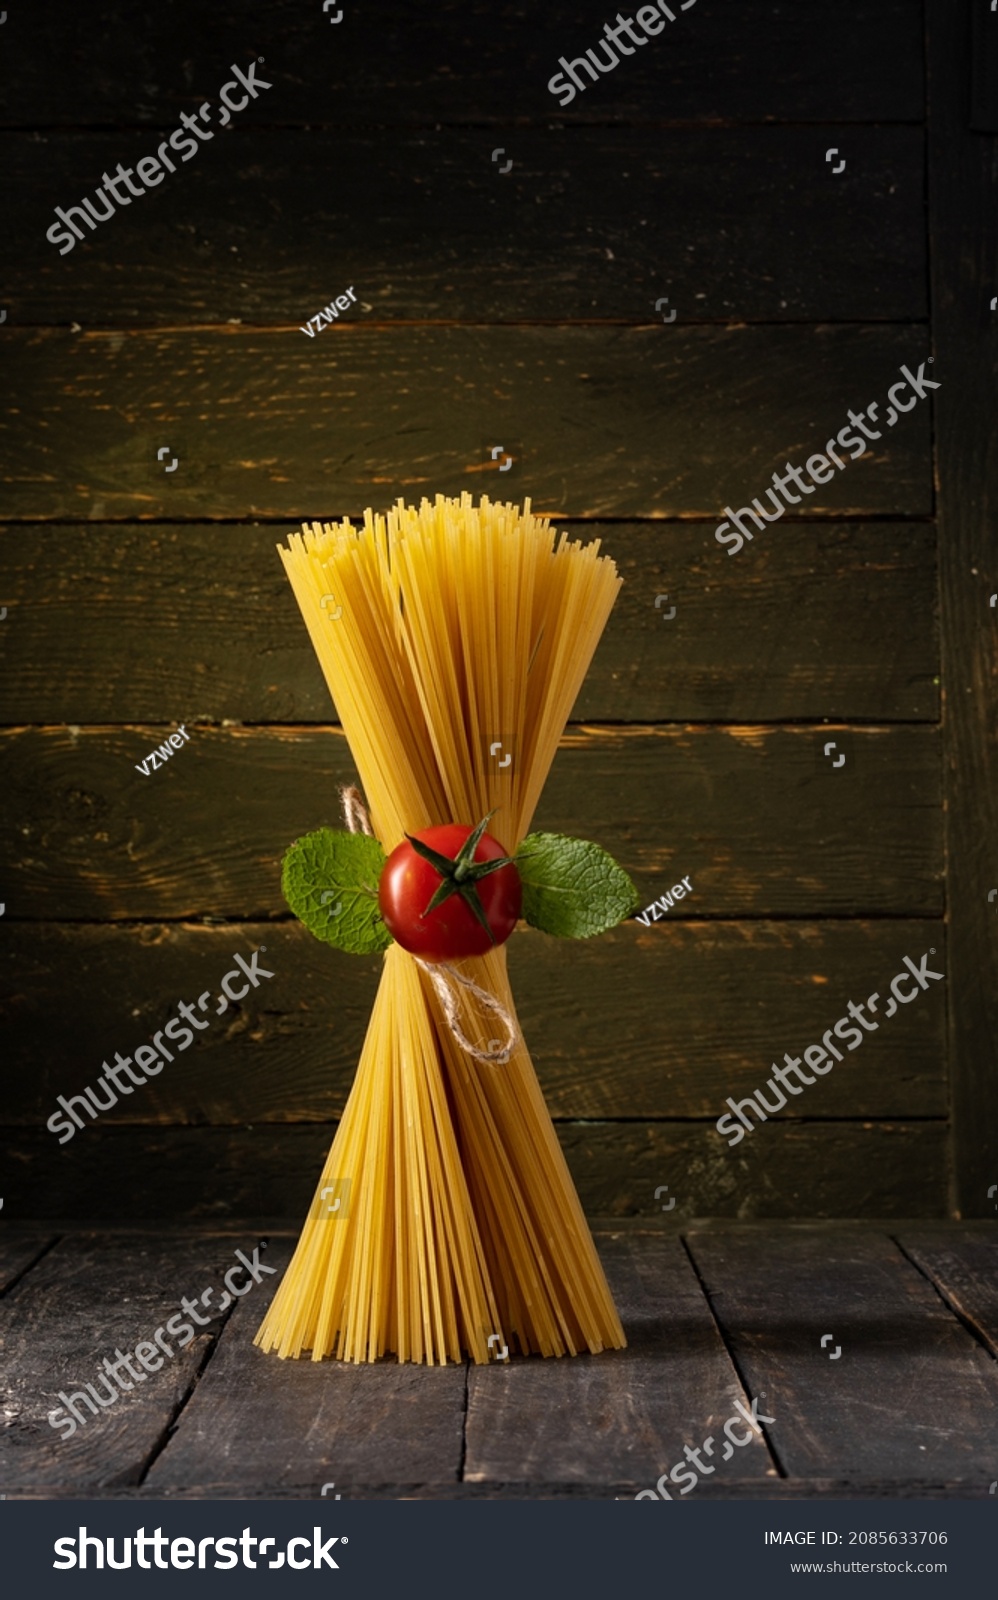 Spaghetti and cherry tomatoes. Not cooked spaghetti. Spaghetti standing upright. #2085633706